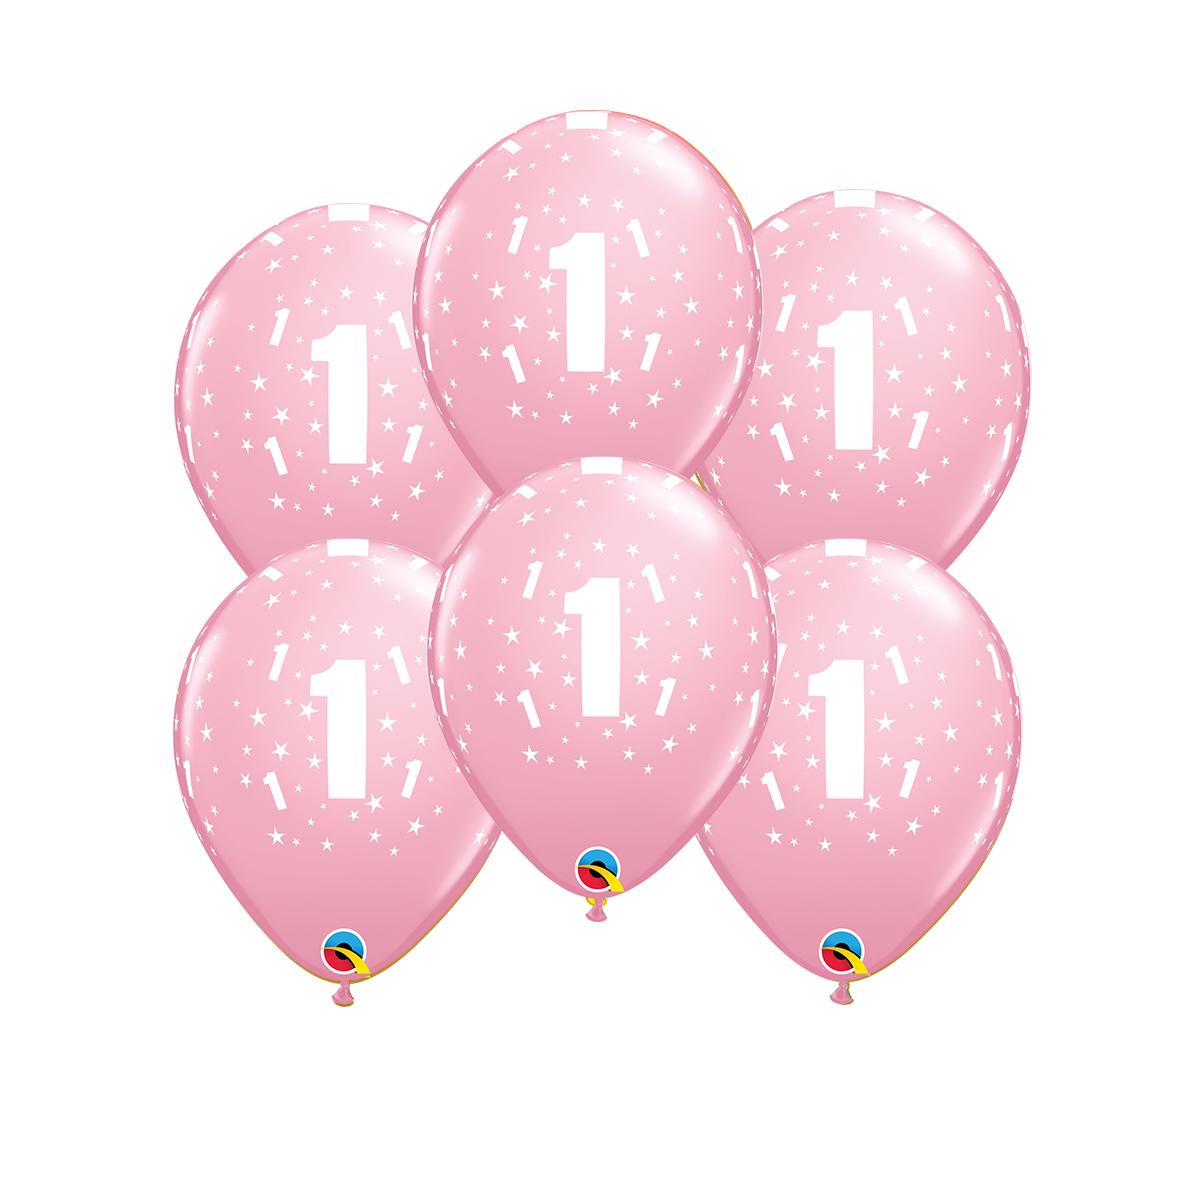 Image Of 6 Inflated Pink Age 1 Latex